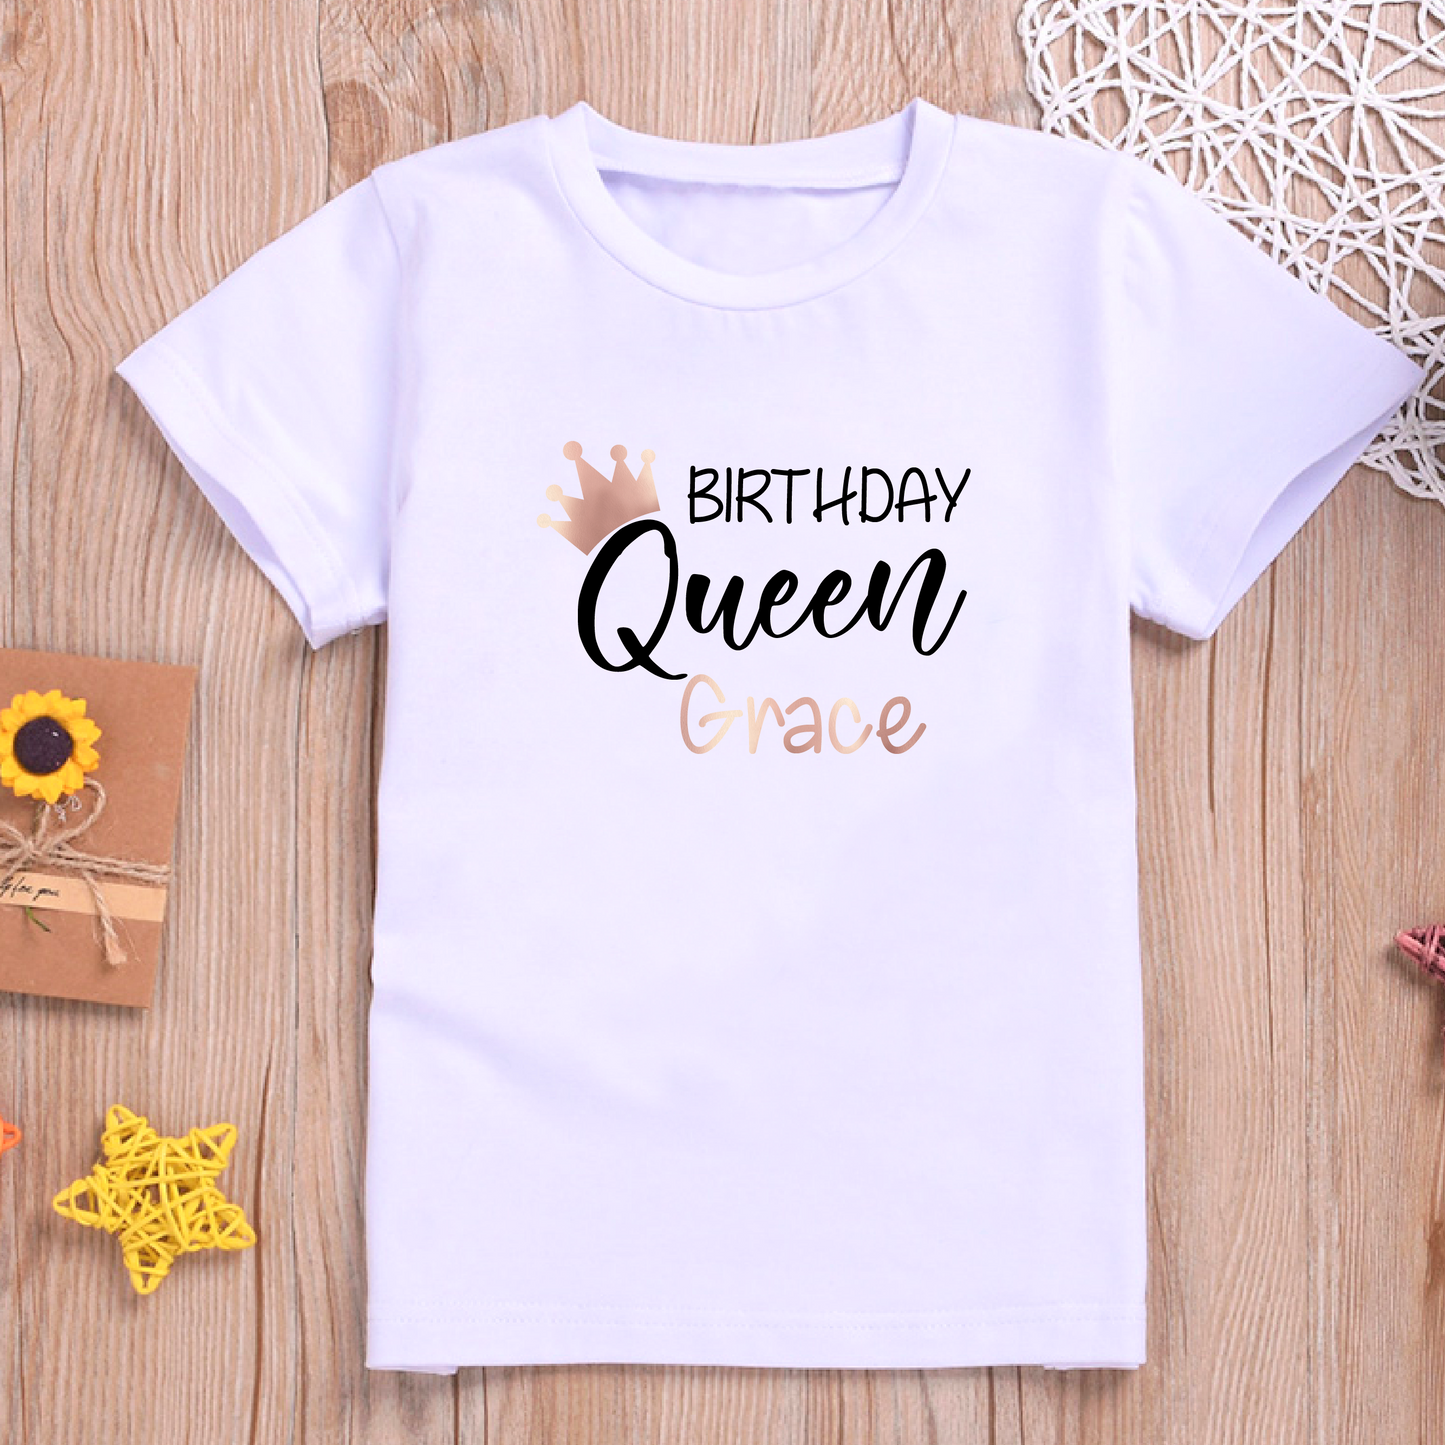 Personalised Birthday Queen T-shirt for Kids and Baby Vest for Babies